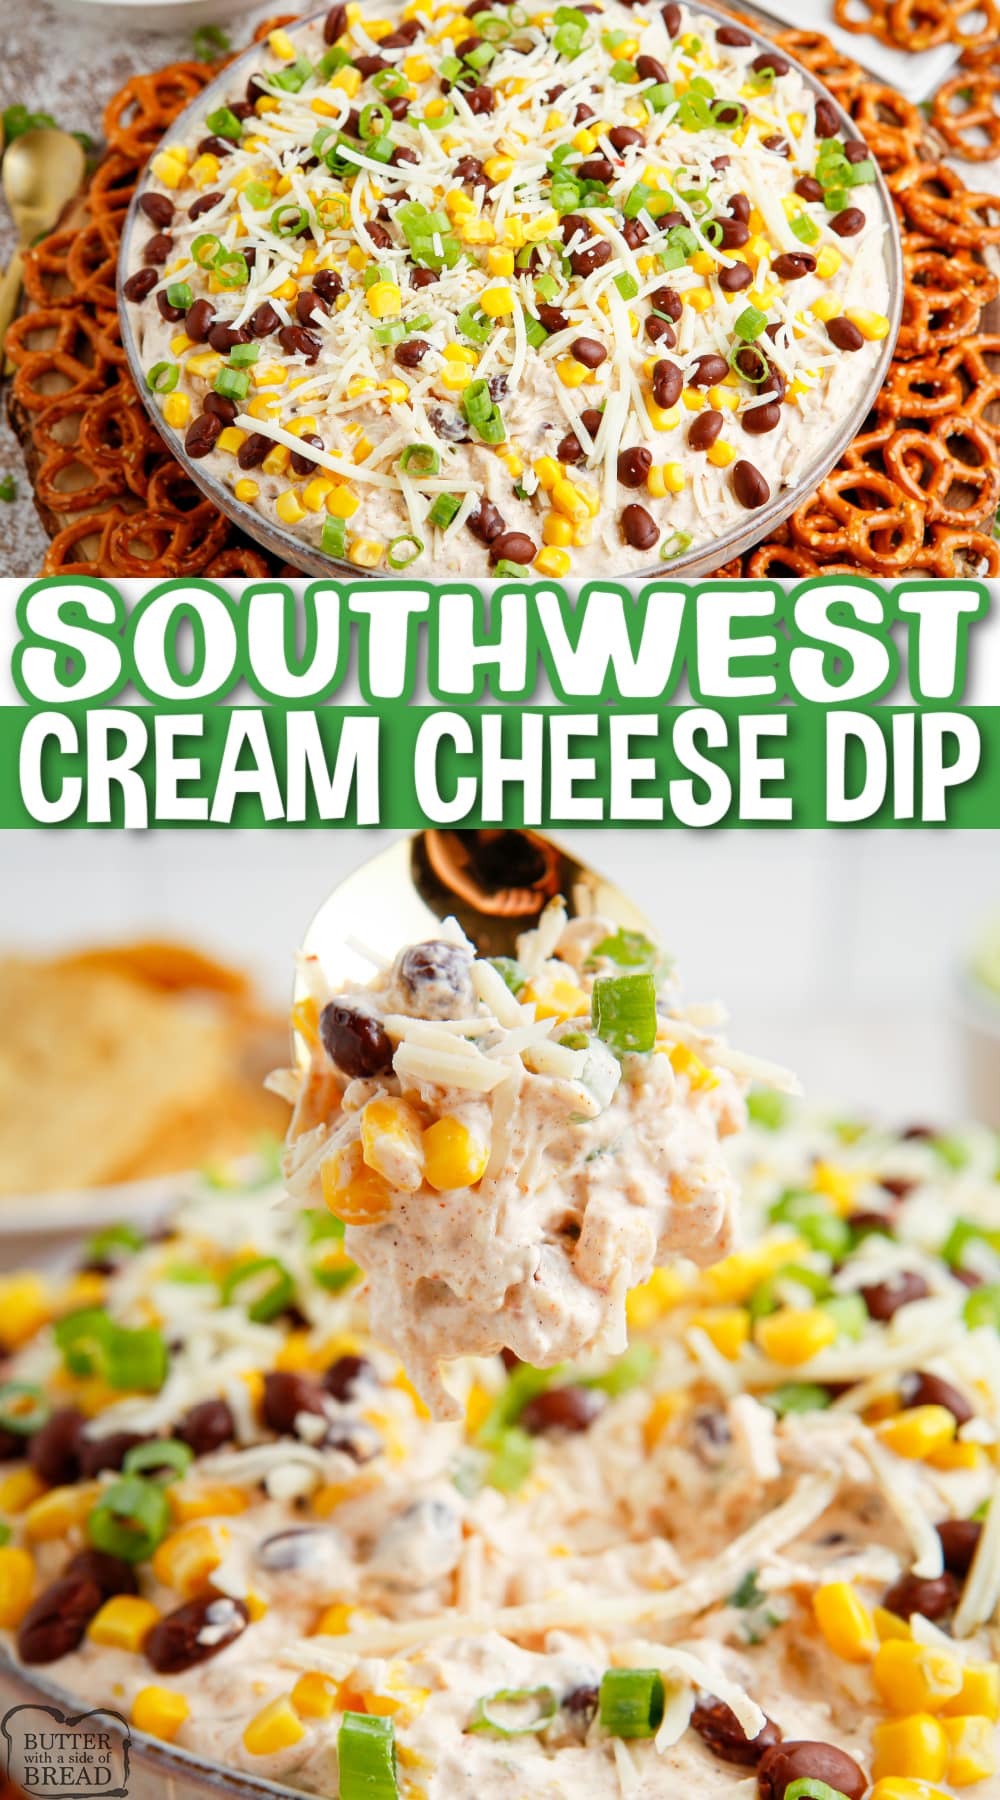 Southwest Cream Cheese Dip is full of flavor and pairs perfectly with chips, crackers or veggies. This simple dip is the perfect appetizer! 